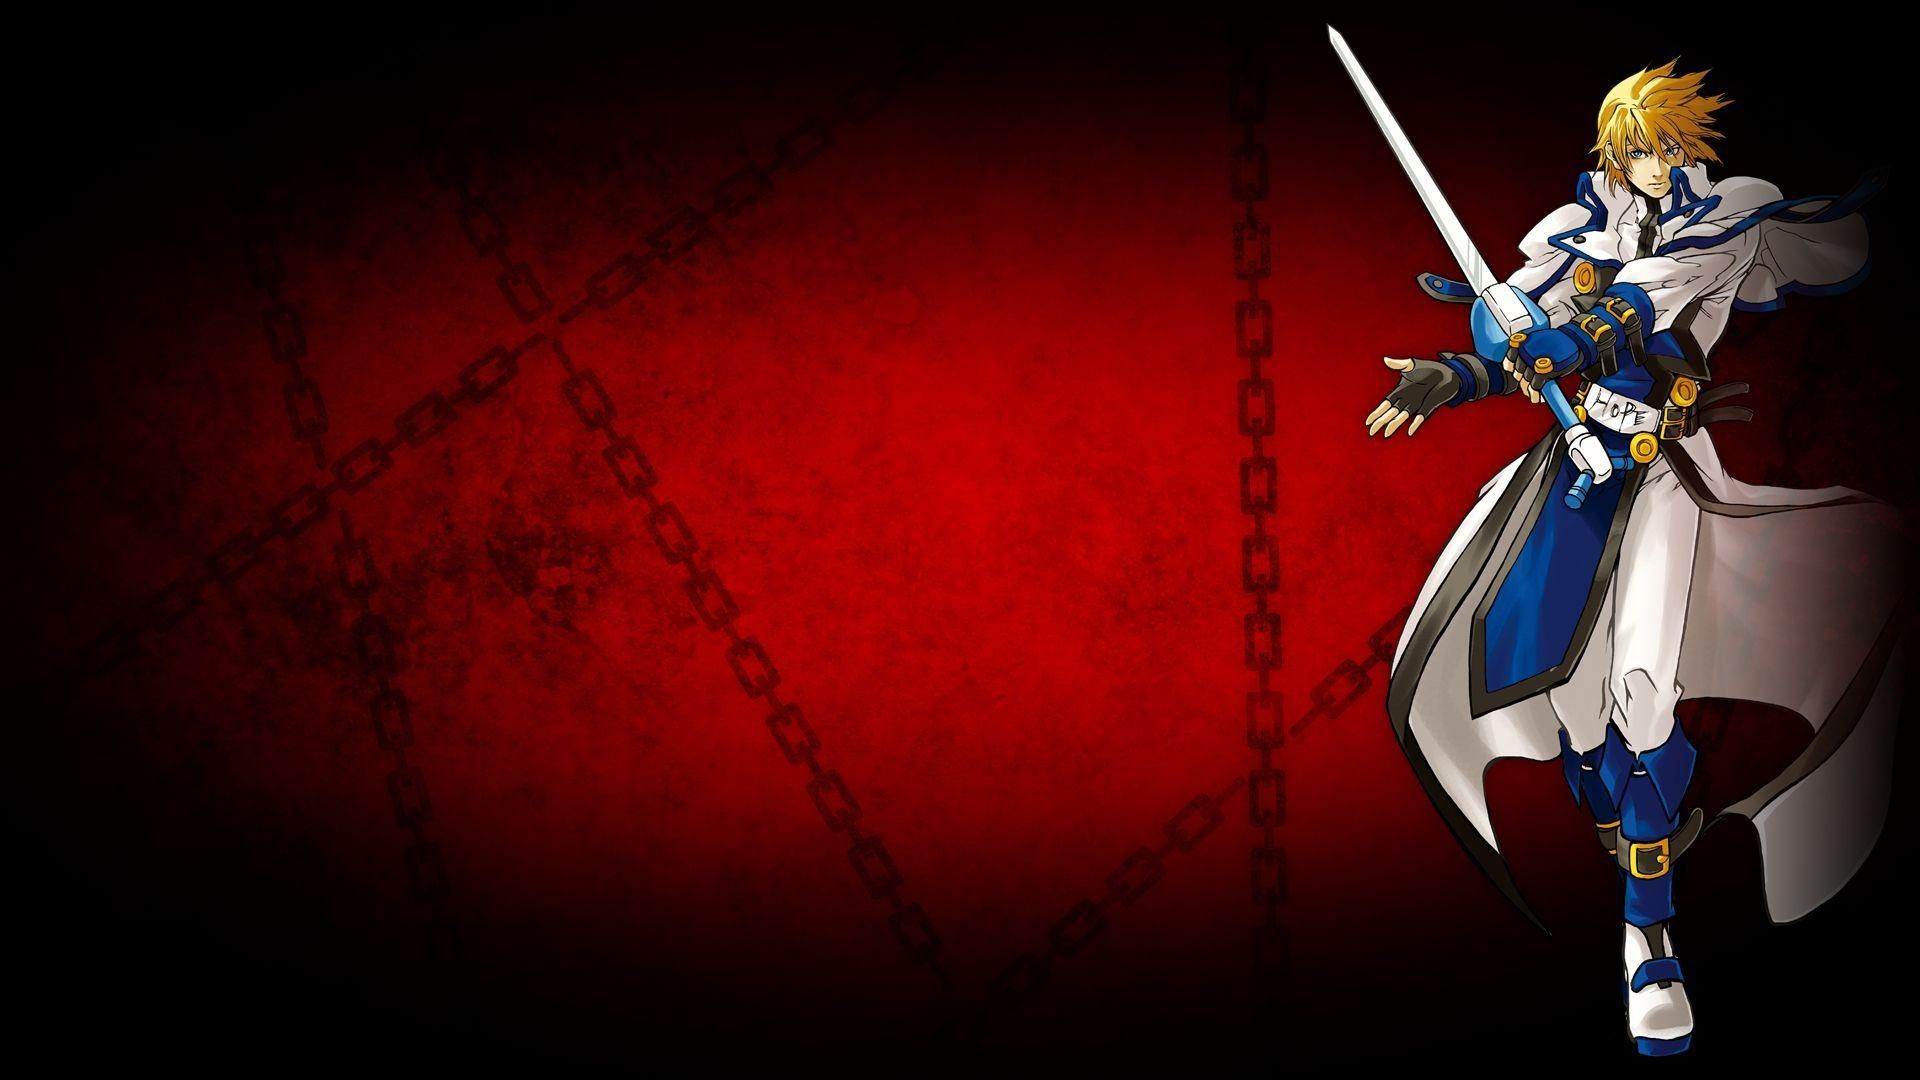 Guilty Gear XX, Accent Core Plus R, High-definition gameplay, Anime fighting game wallpapers, 1920x1080 Full HD Desktop